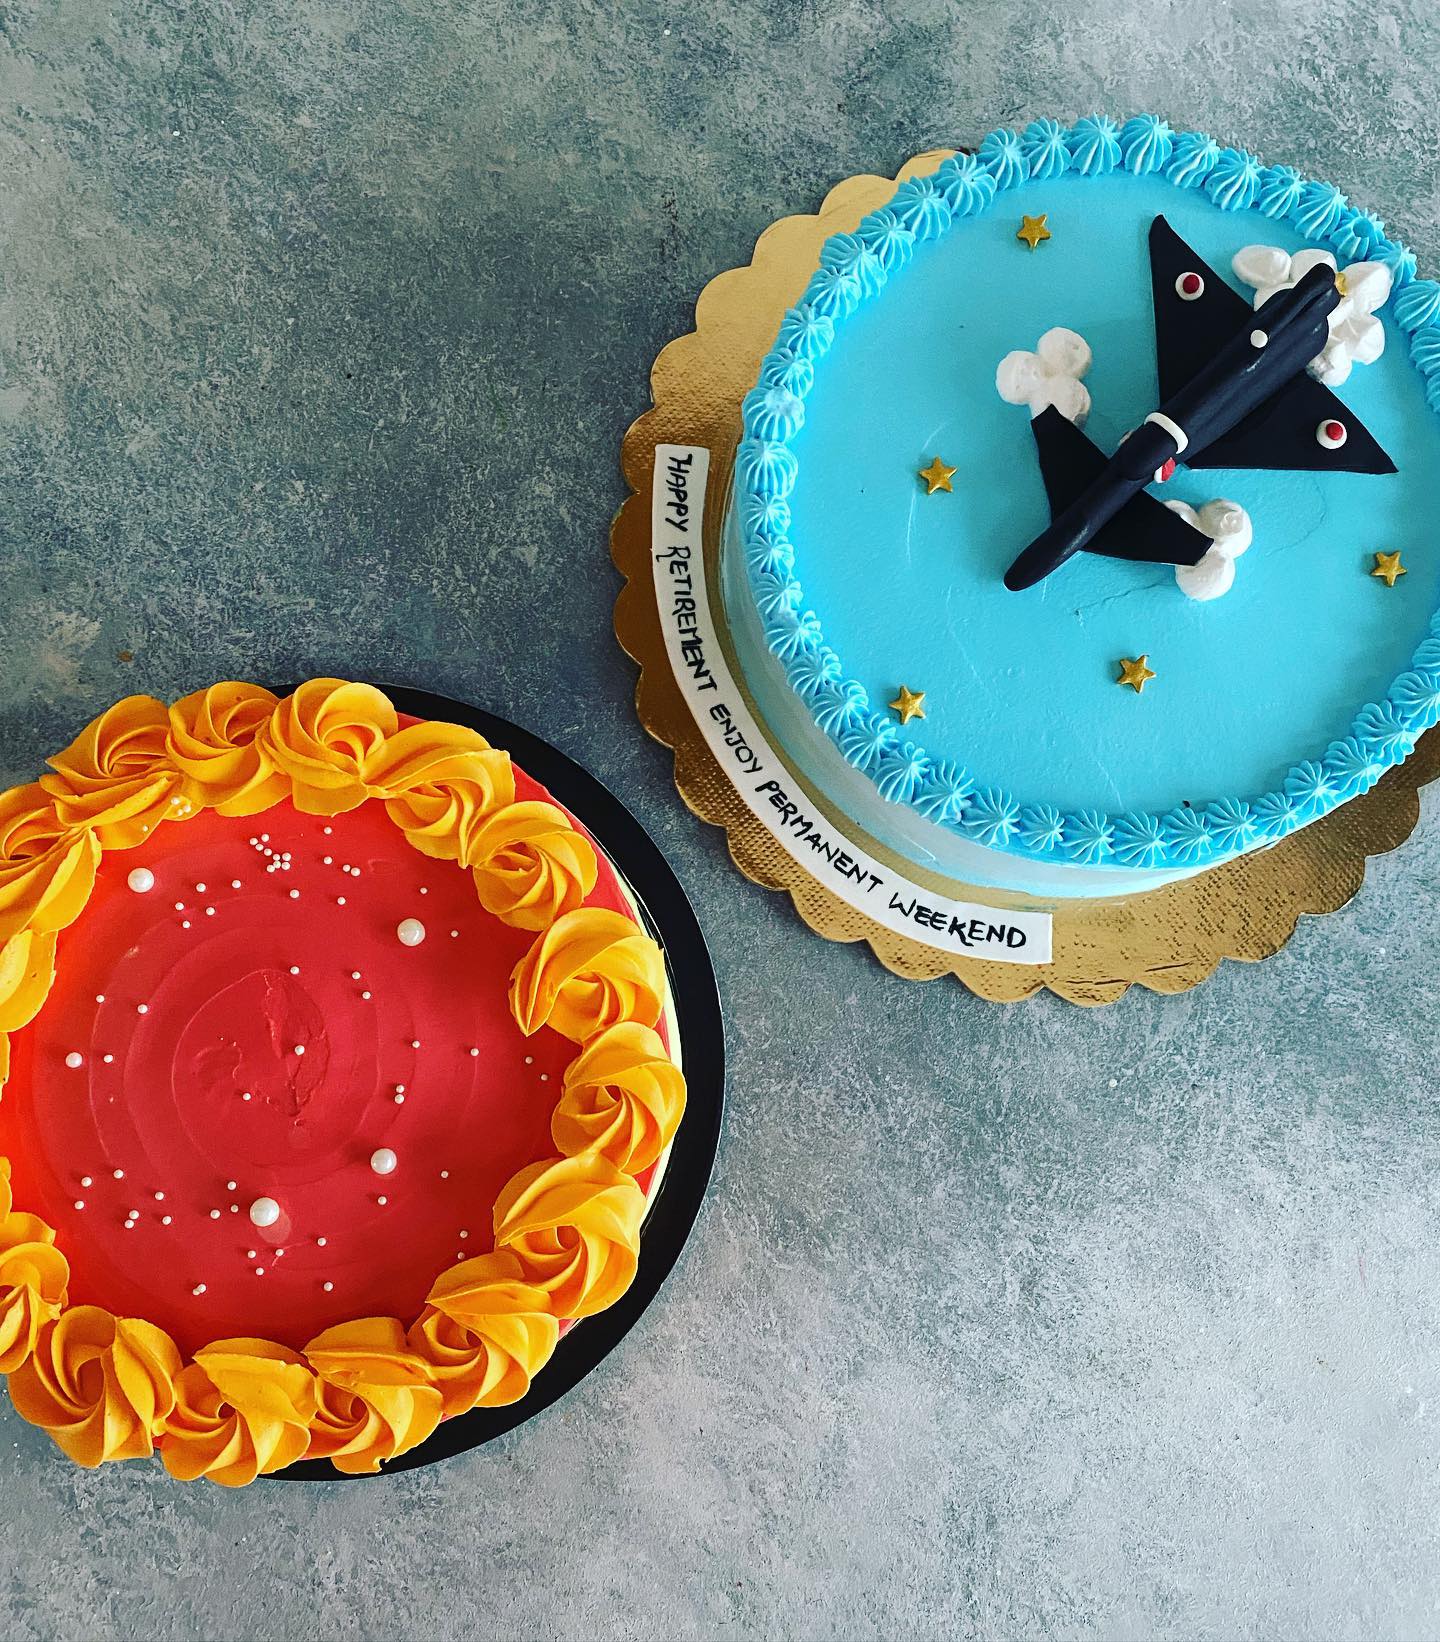 Ringing in the new year with some amazing cakes going out of our kitchen 🎉🥳

#cake #cakes #celebration #creatingmemories #bengaluru #foodies #food #yumm #so #lbb #lbbbangalore #birthday #memories